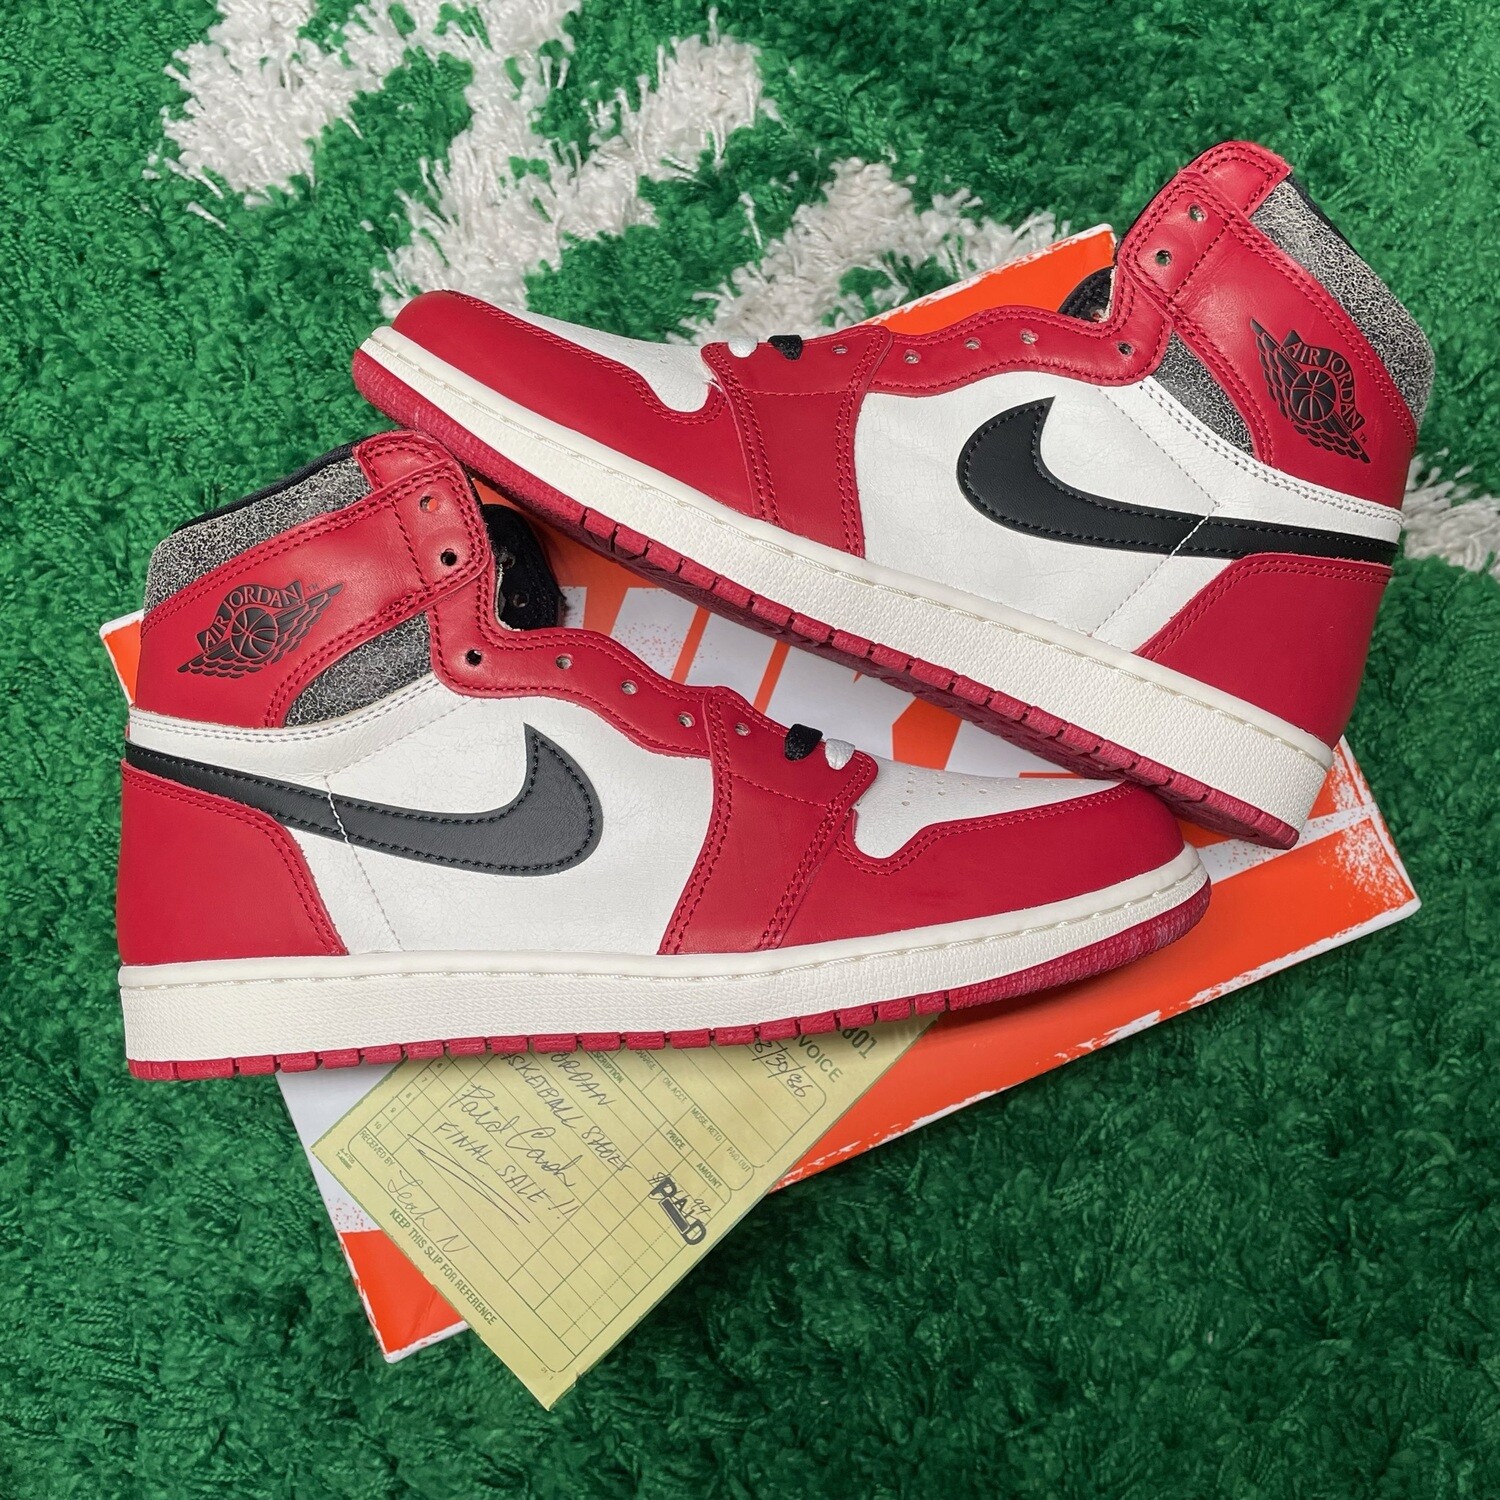 Jordan 1 Retro High OG Chicago Lost and Found Size 10.5M/12W